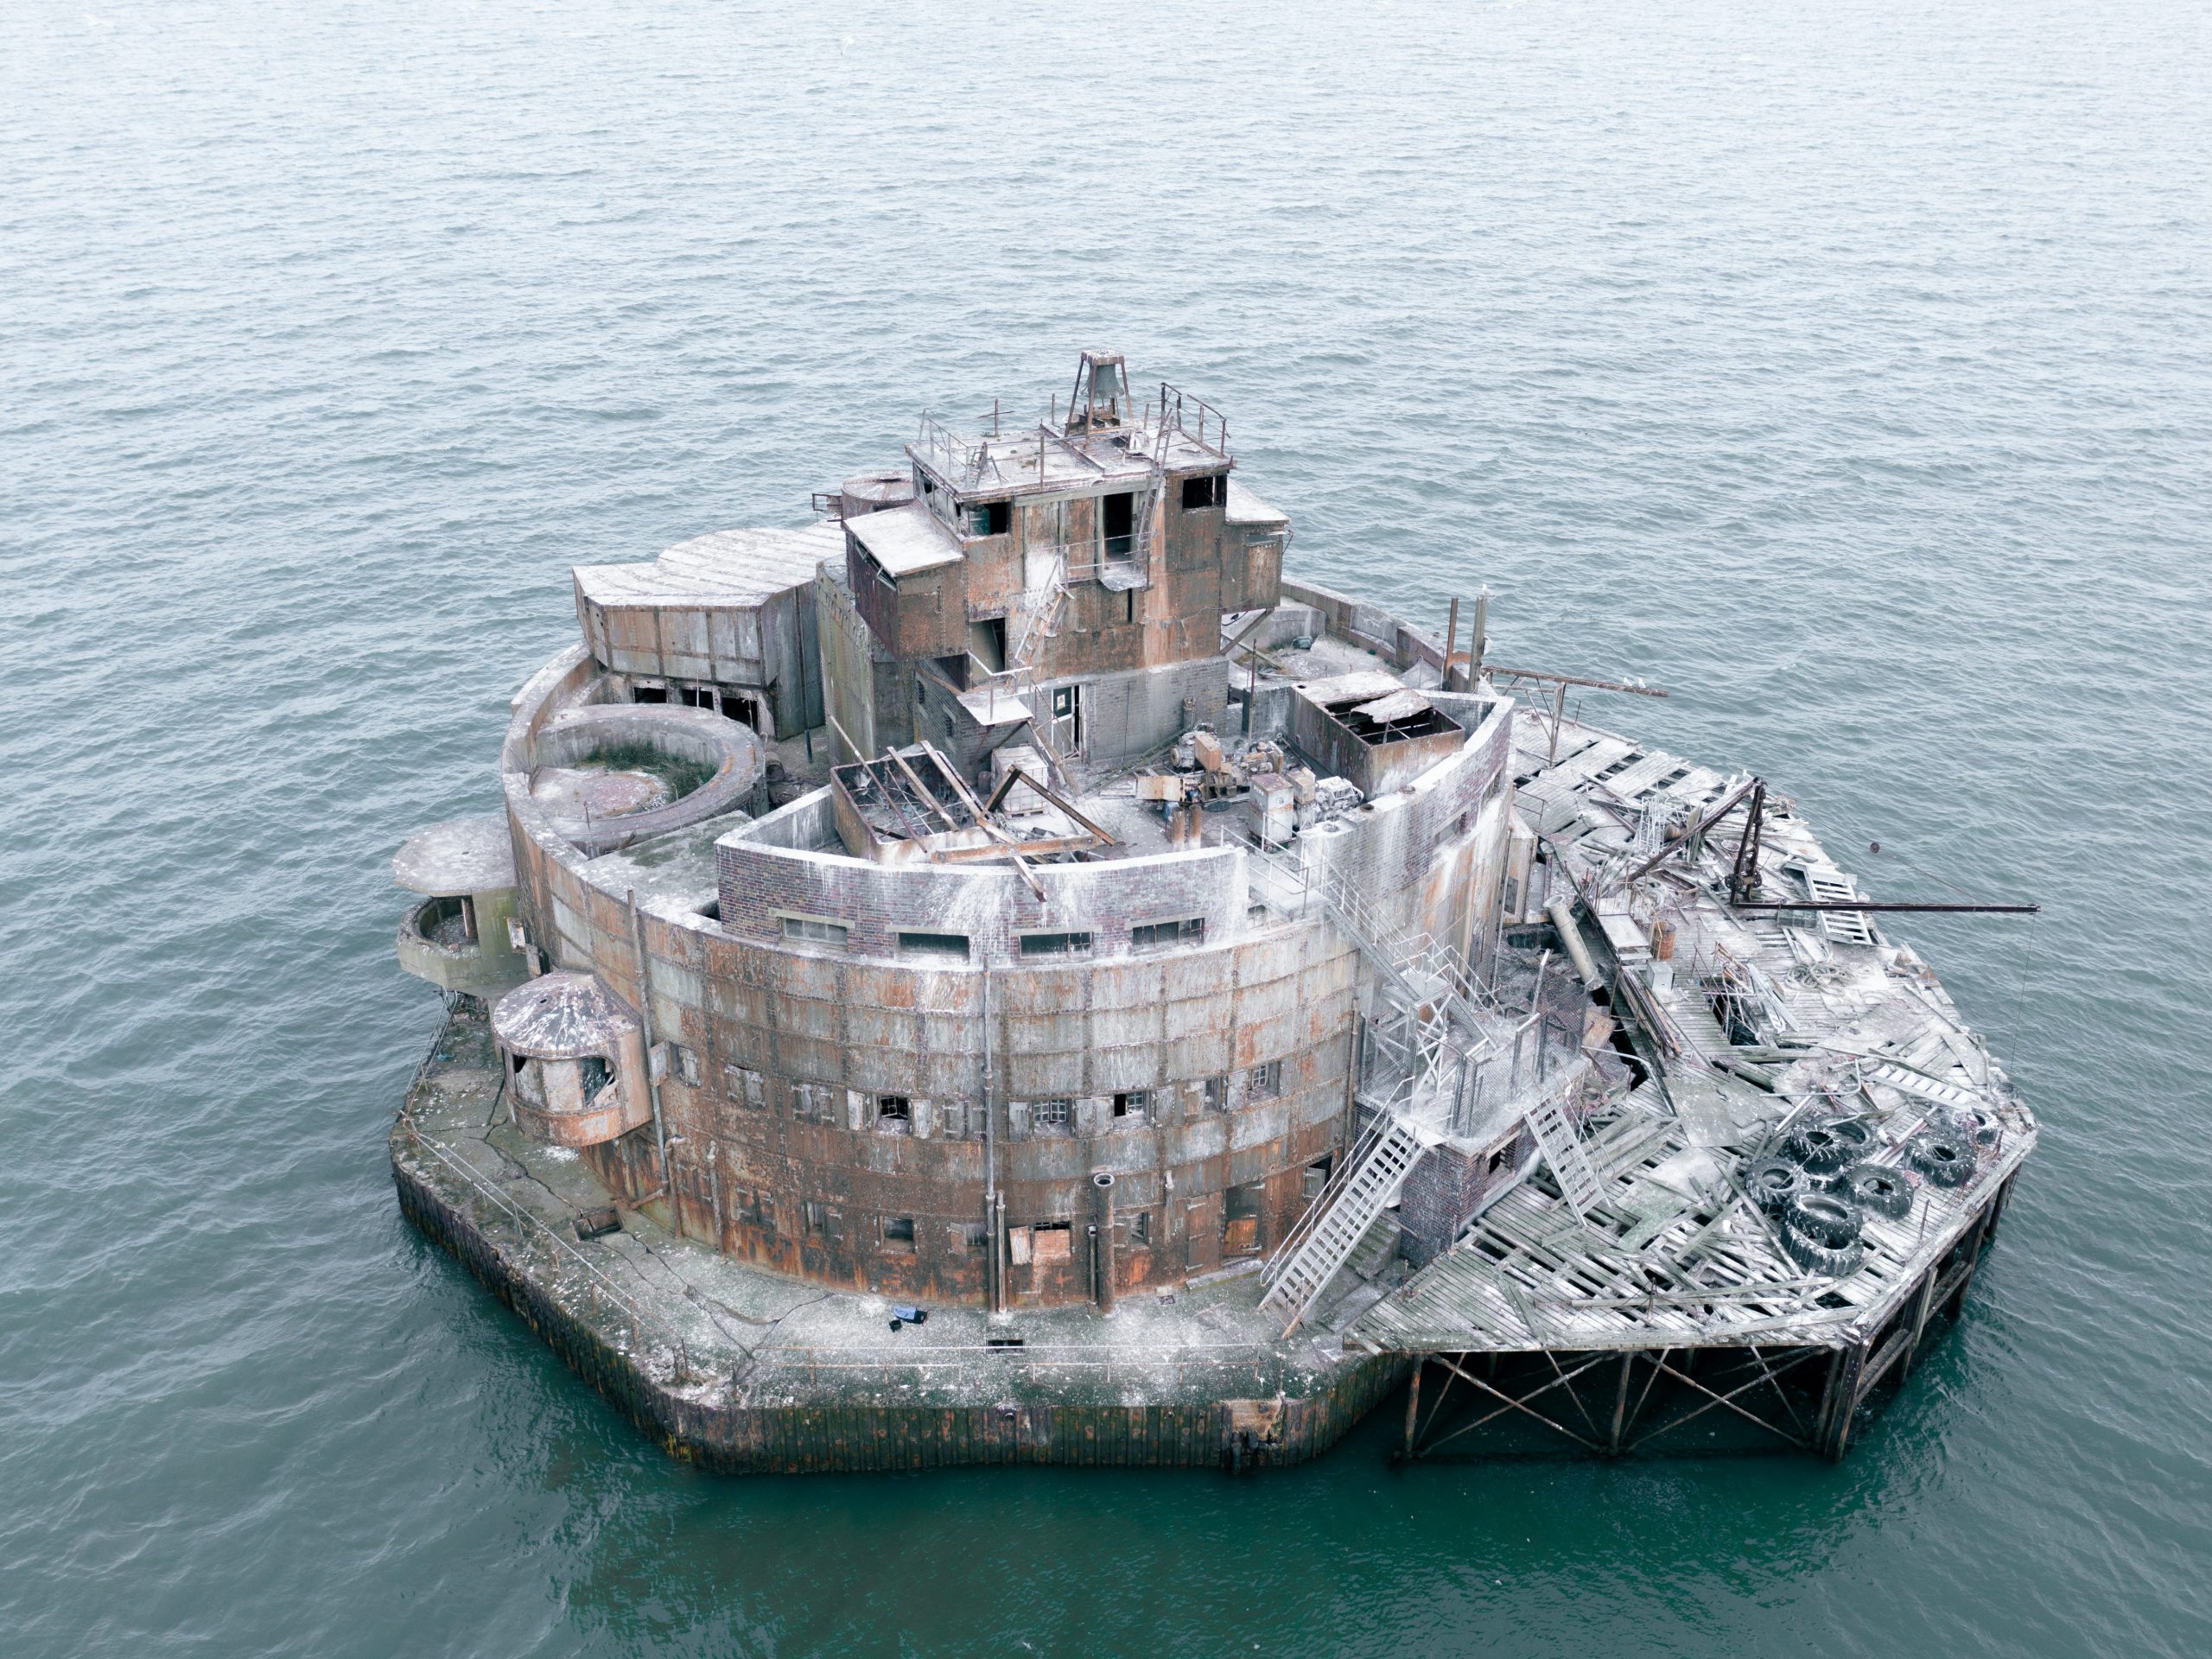 The sea fort from a different angle